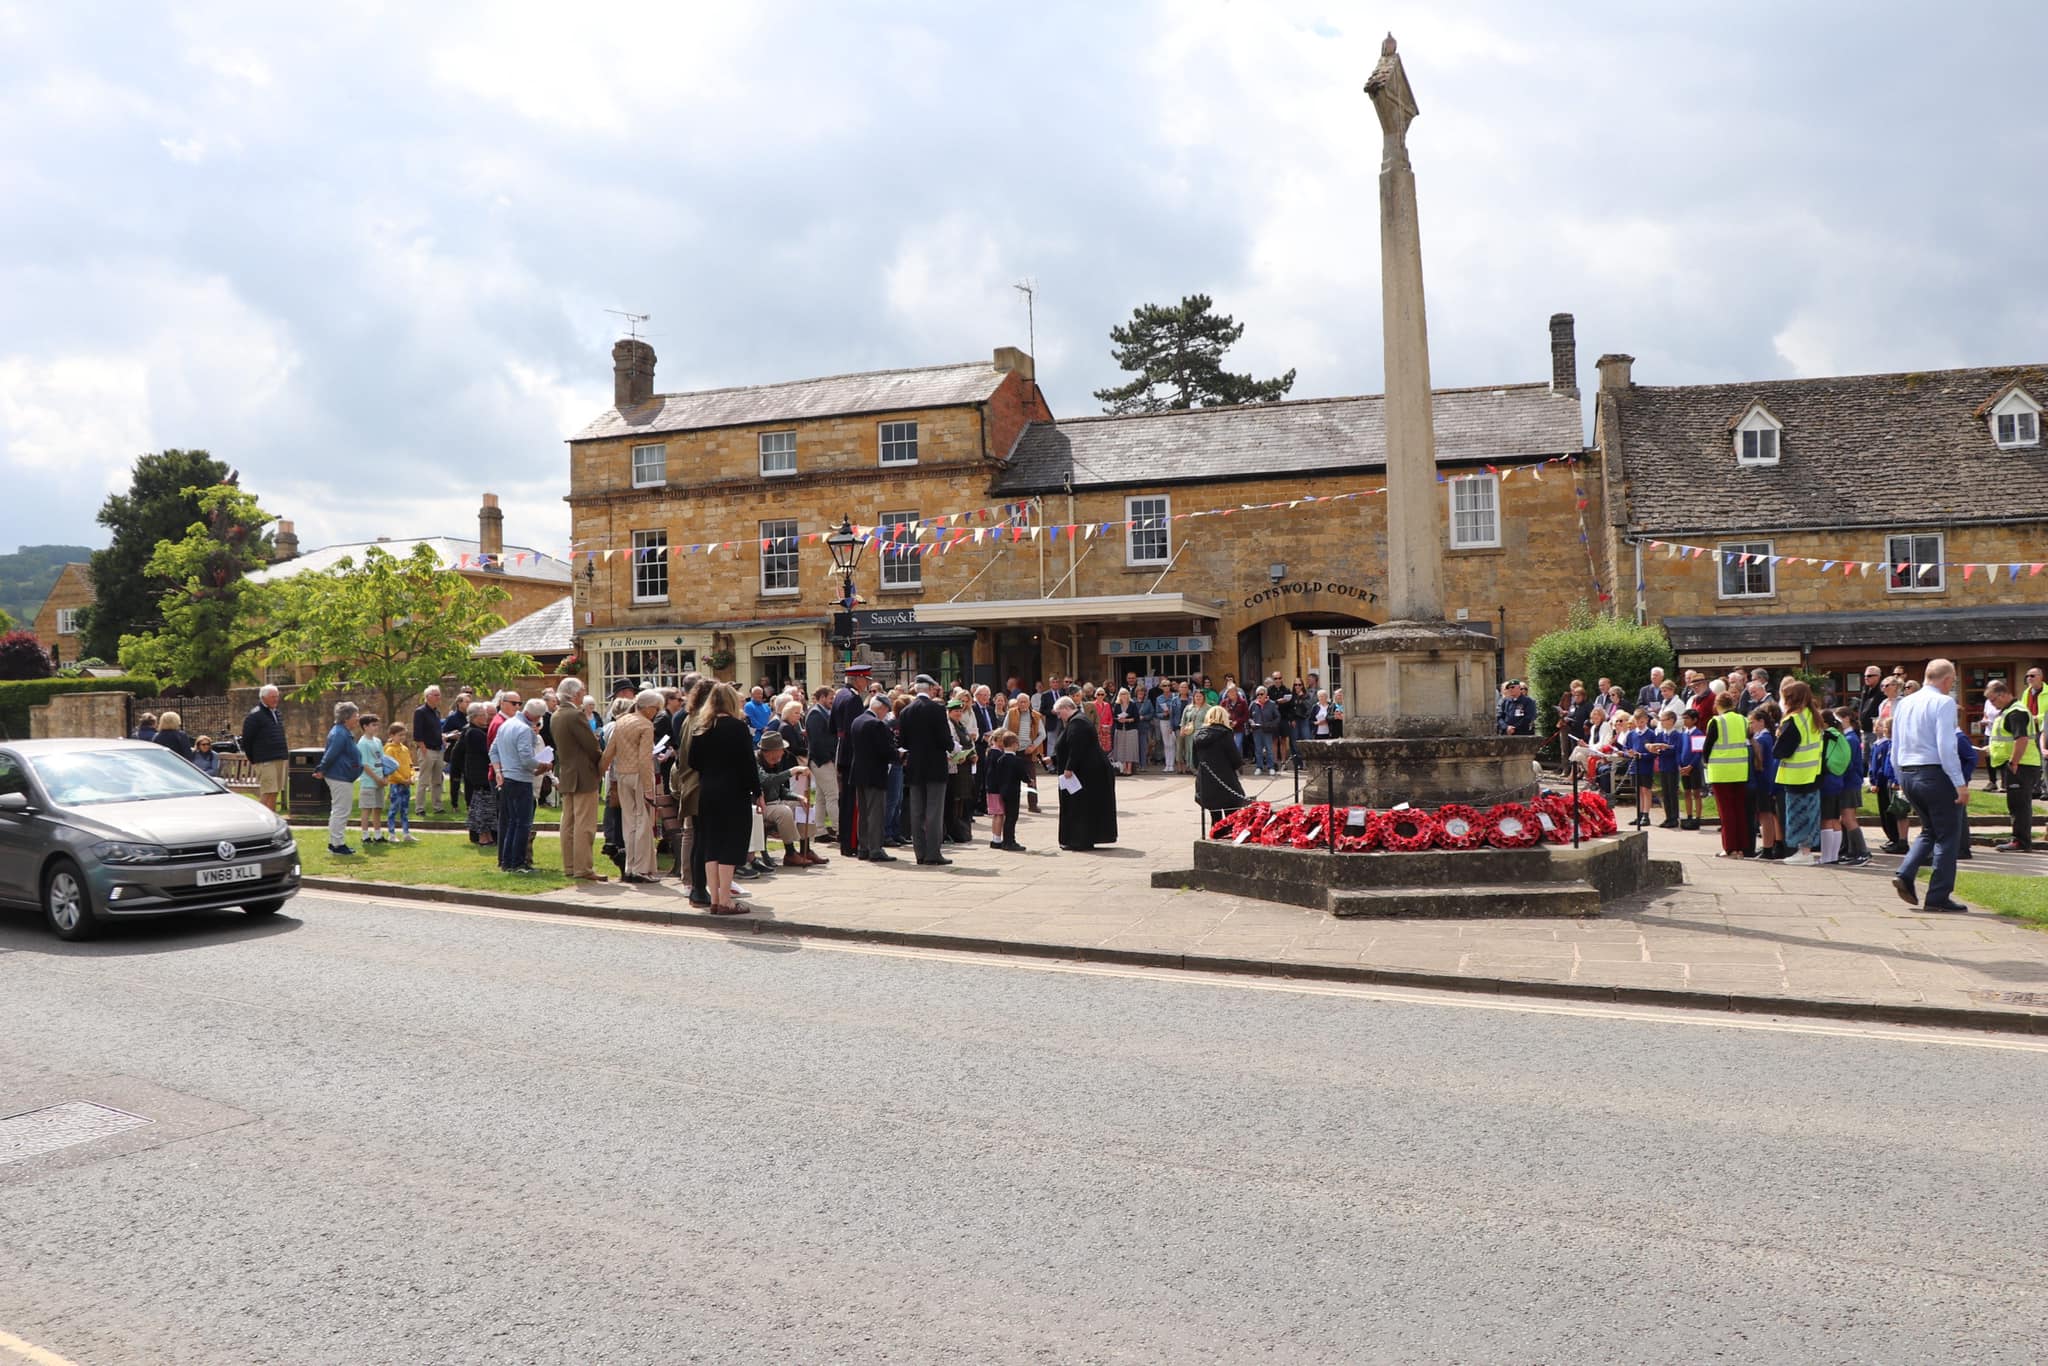 People gathered around the war memorial to commemorate D Day in Broadway